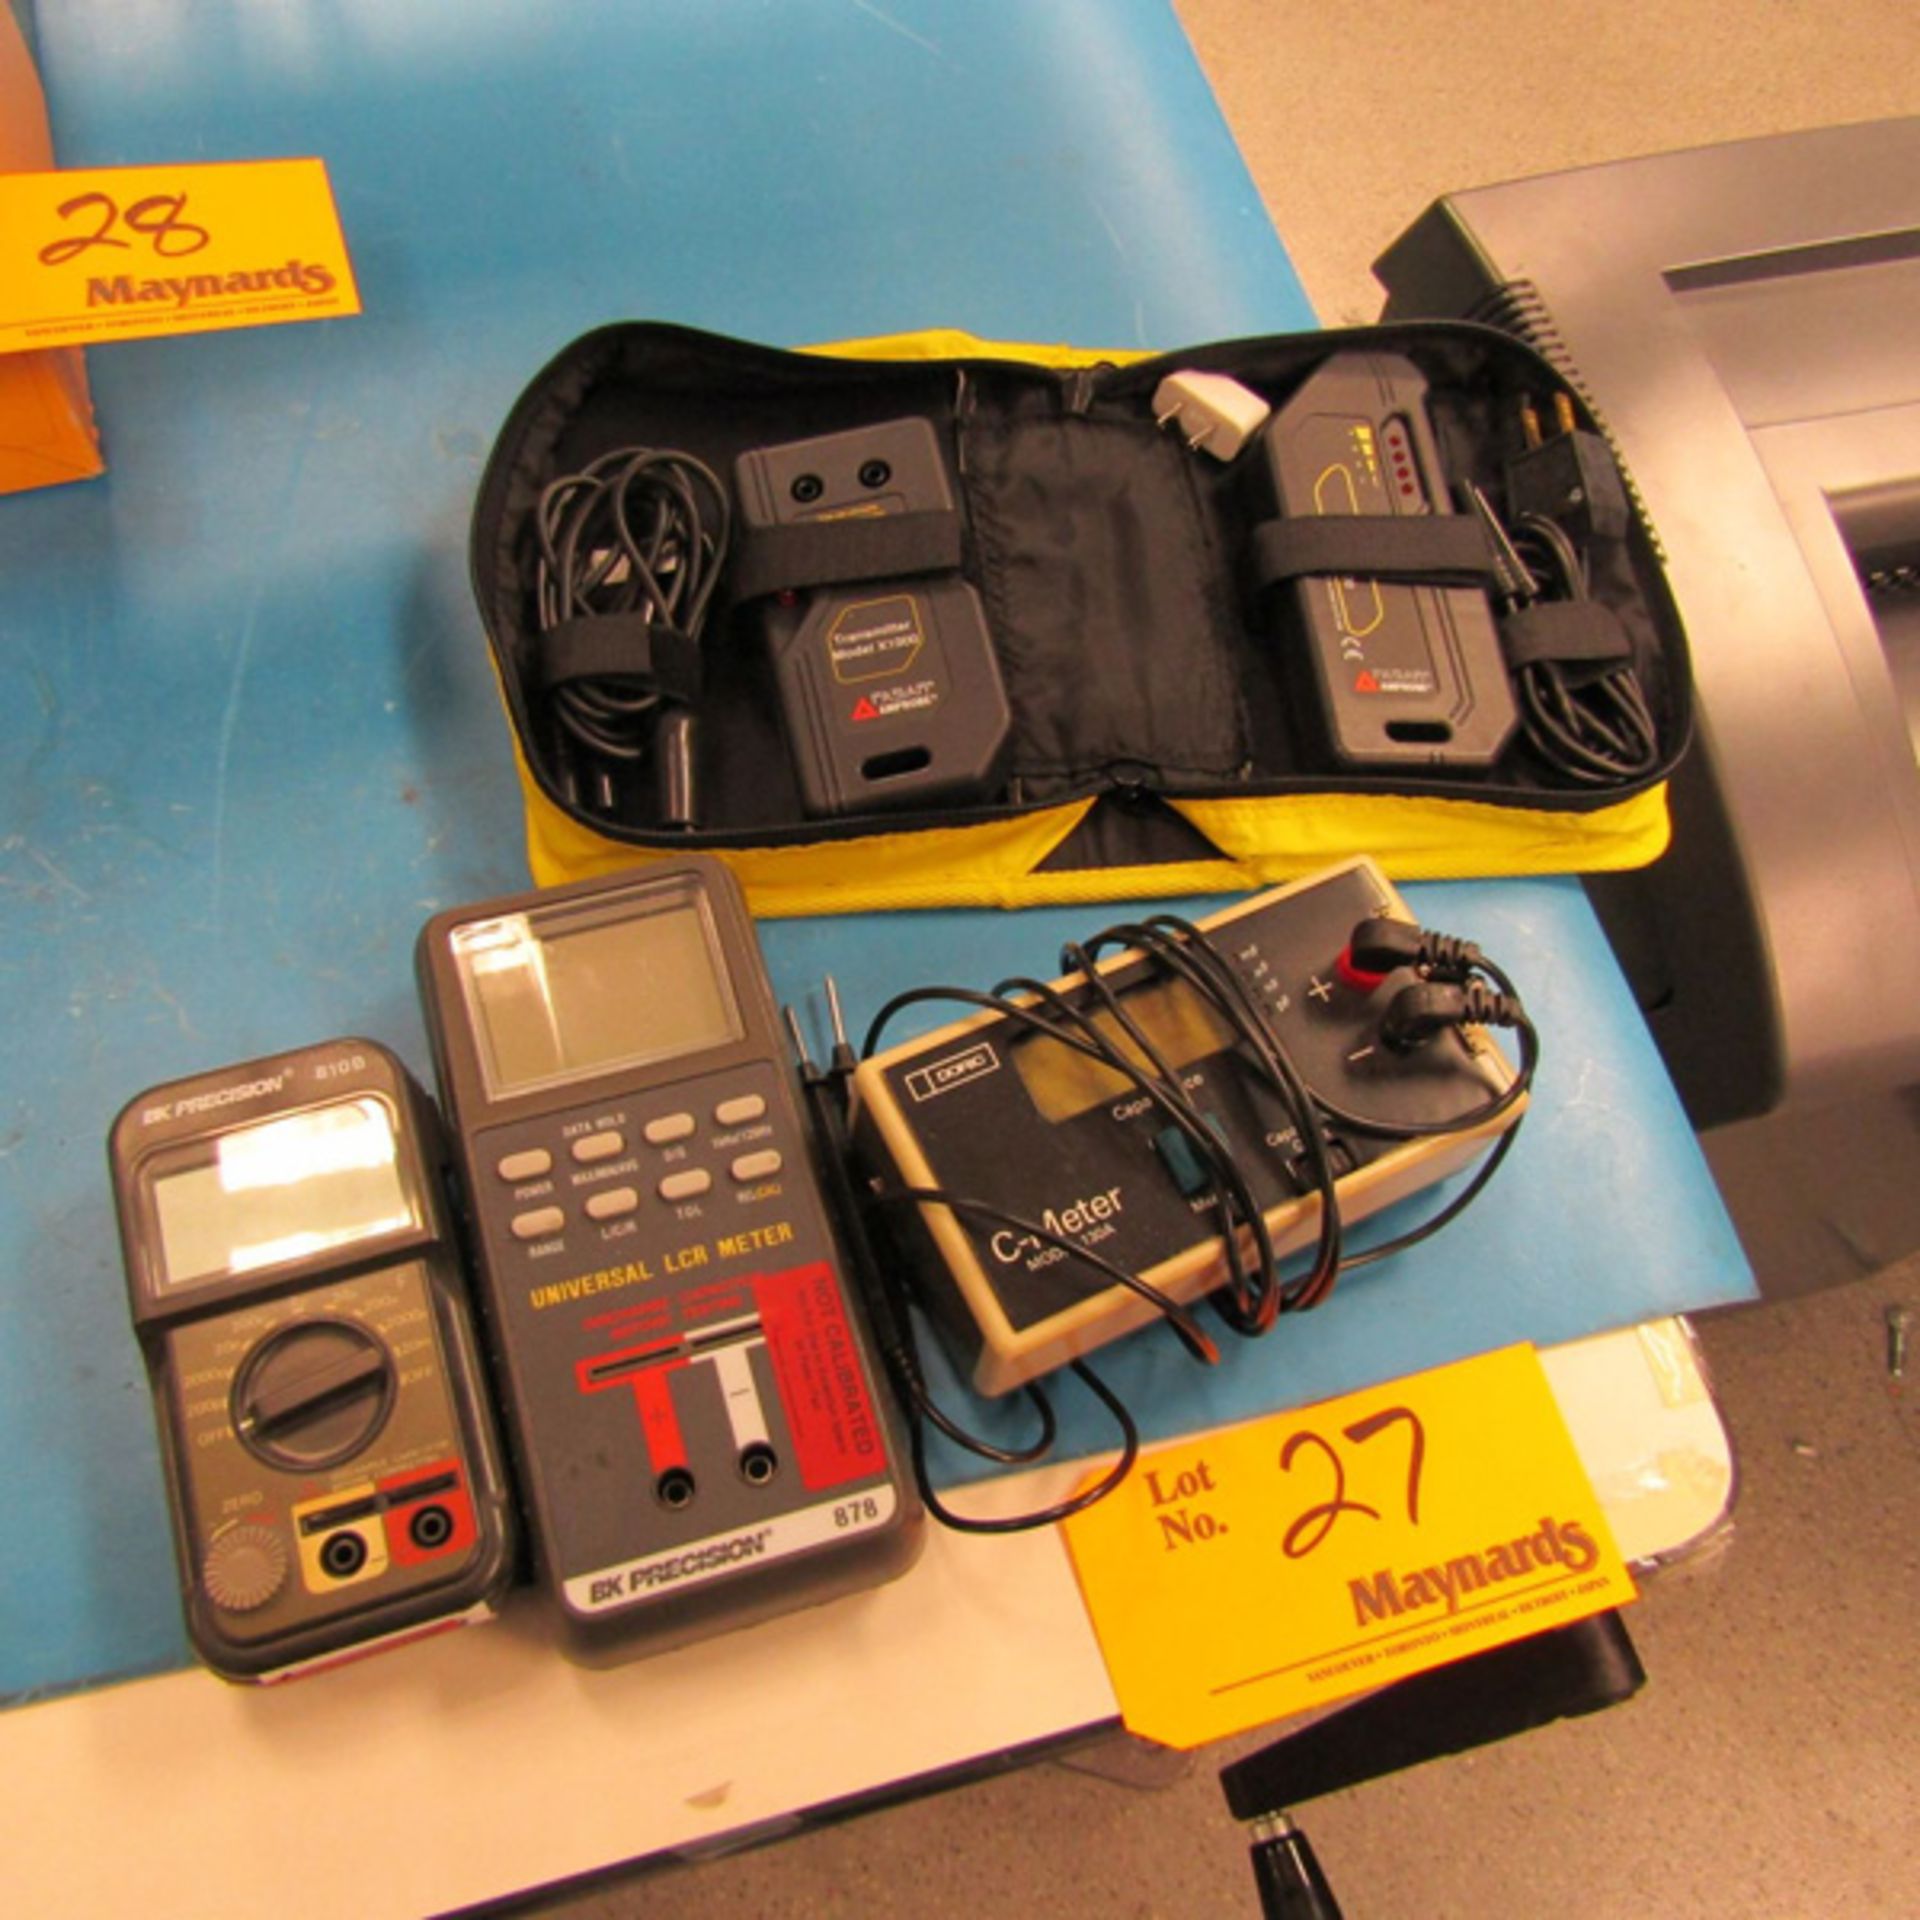 Lot of Inspection Equipment to Include (1) Dorie Model 130A C-Meter, (1) BK Precision 878 Universal